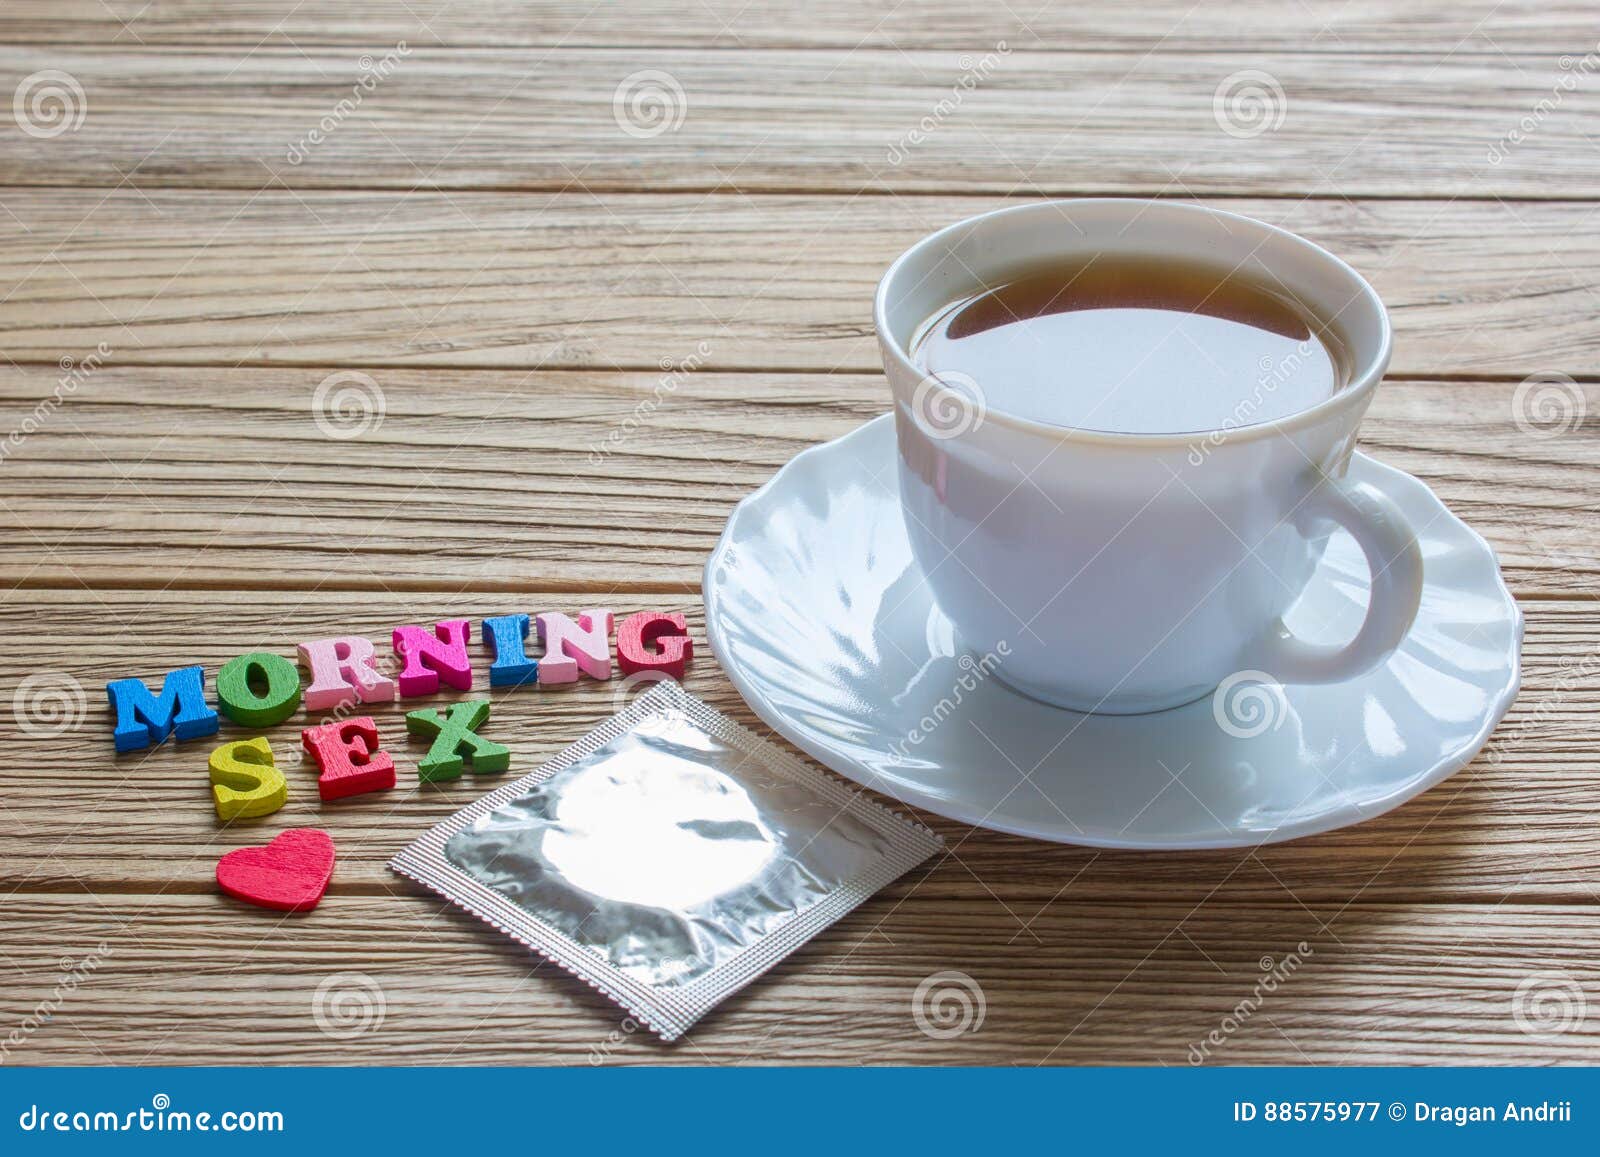 Morning Sex Words Condom and a Cup of Coffee Stock Image image